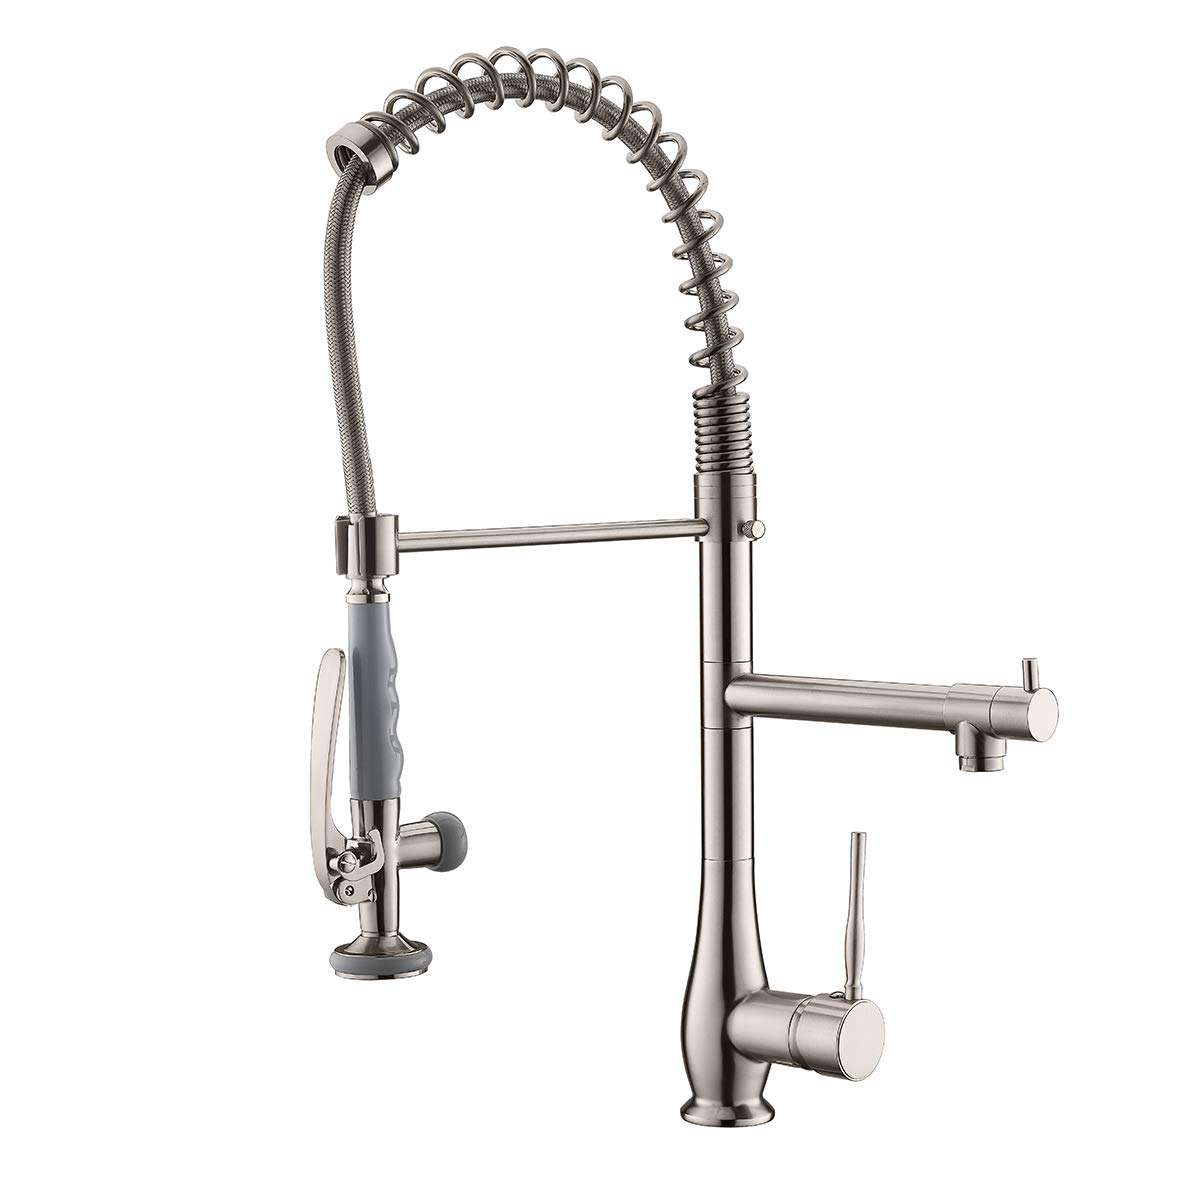 GIMILI Commercial Pull Down Kitchen Faucet with Sprayer